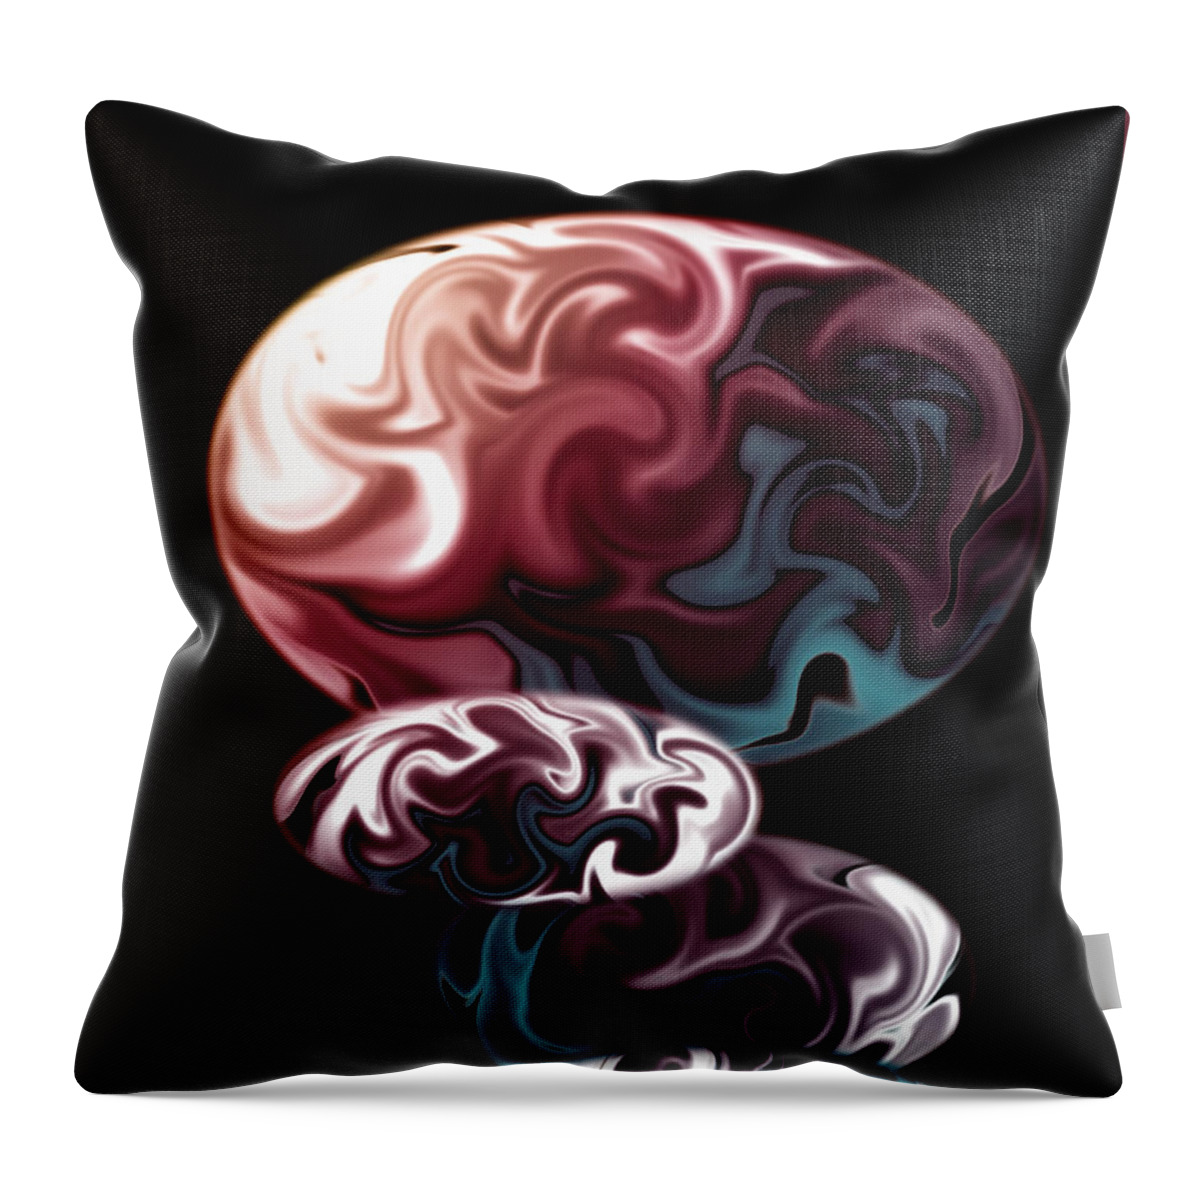 Thought Throw Pillow featuring the digital art Random Thoughts by Carol Crisafi